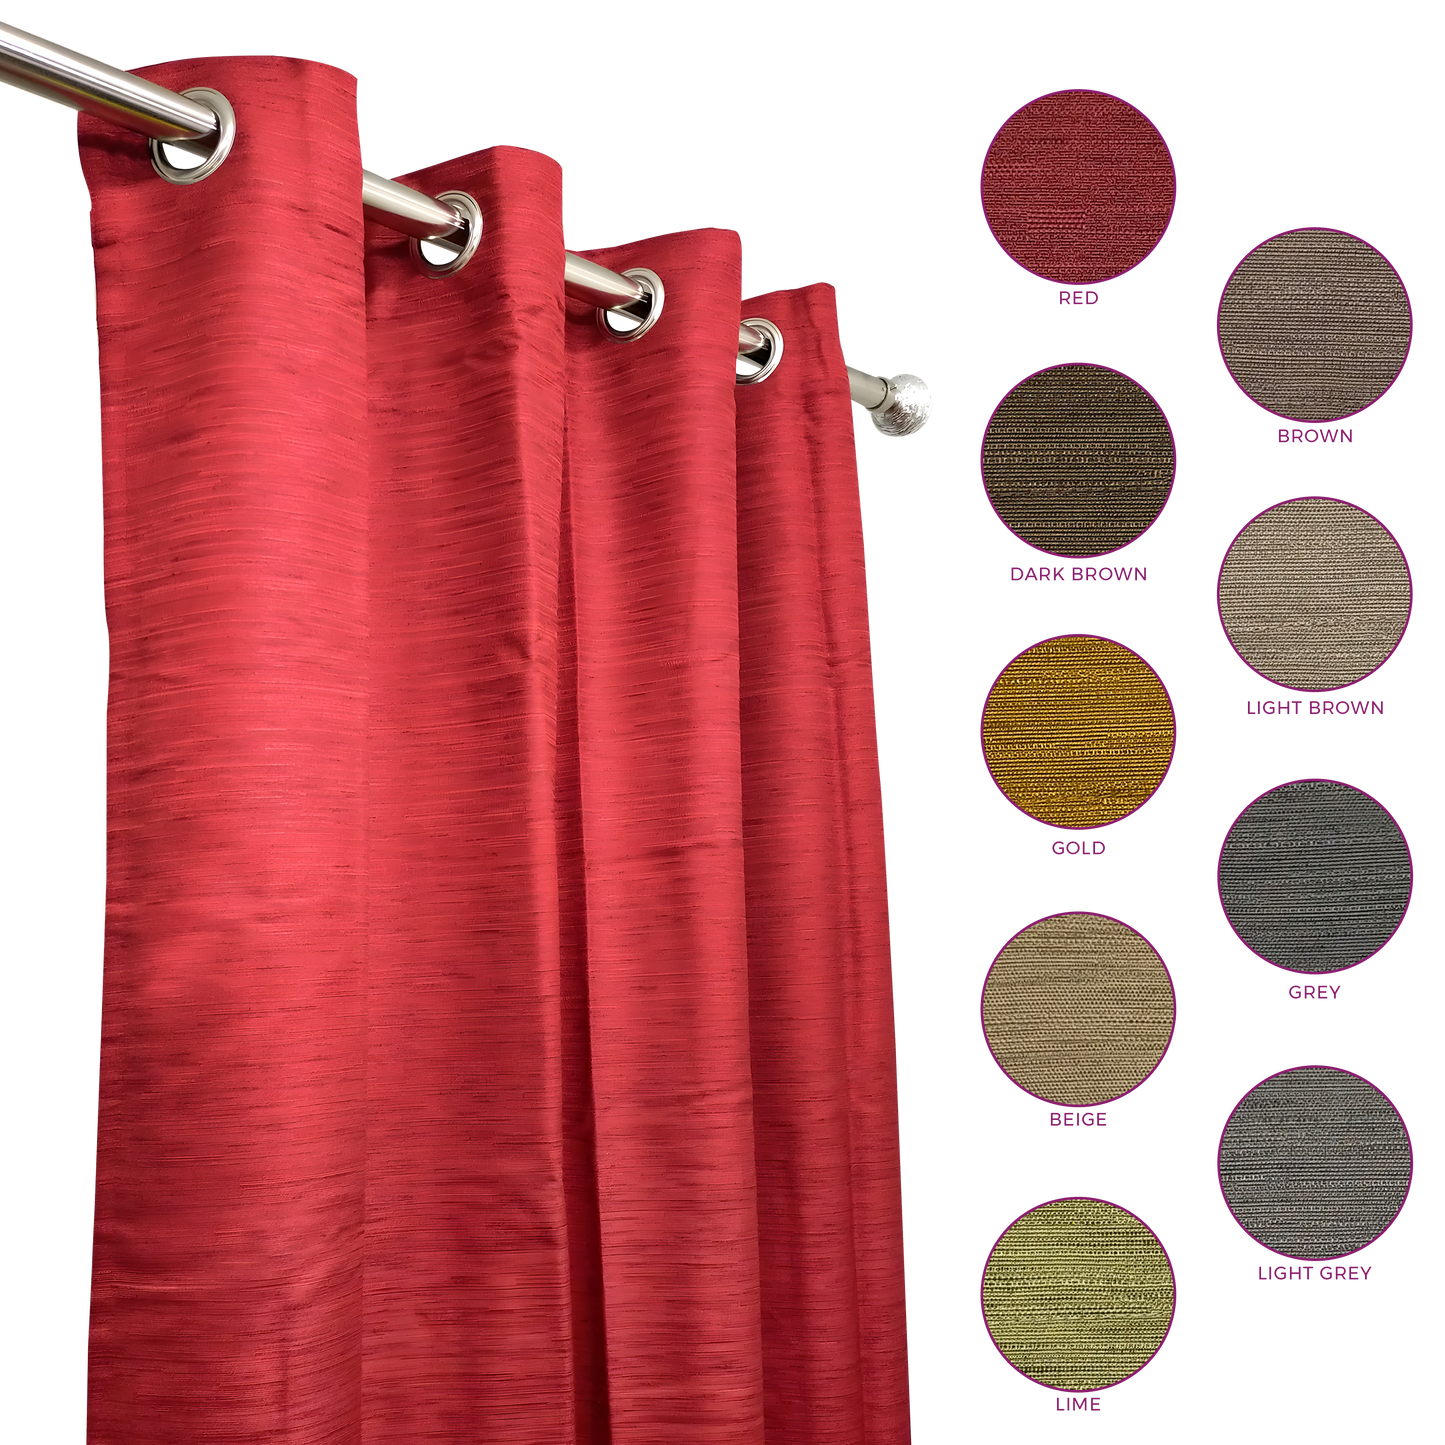 Polyester Curtain with eyelet